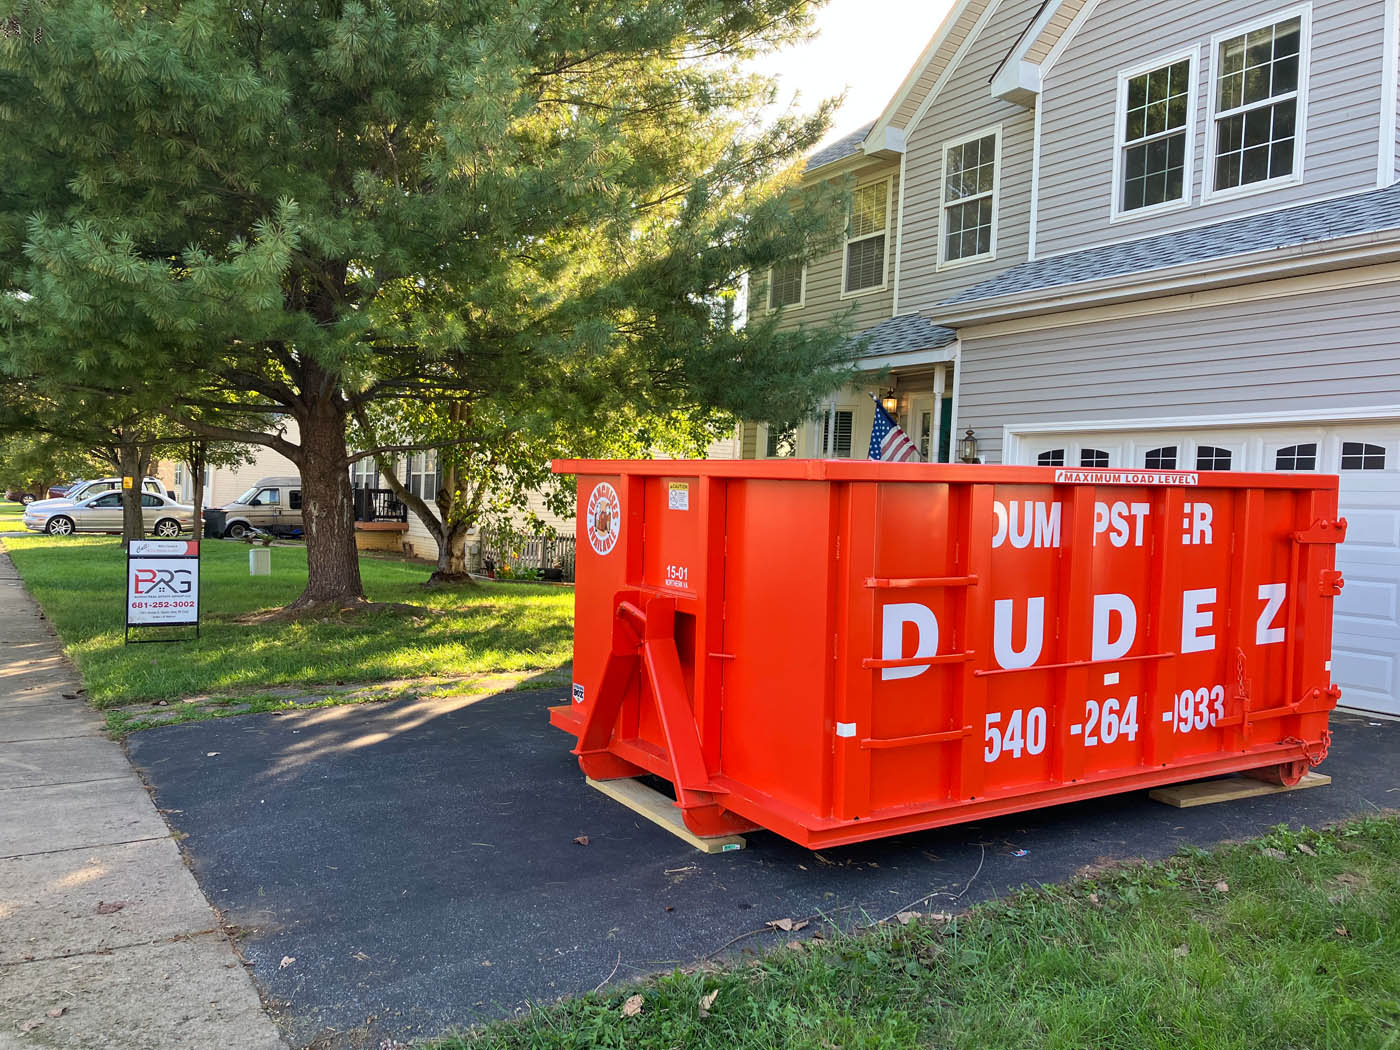 A large orange dumpster from Dumpster Dudez rented to help pick up waste.